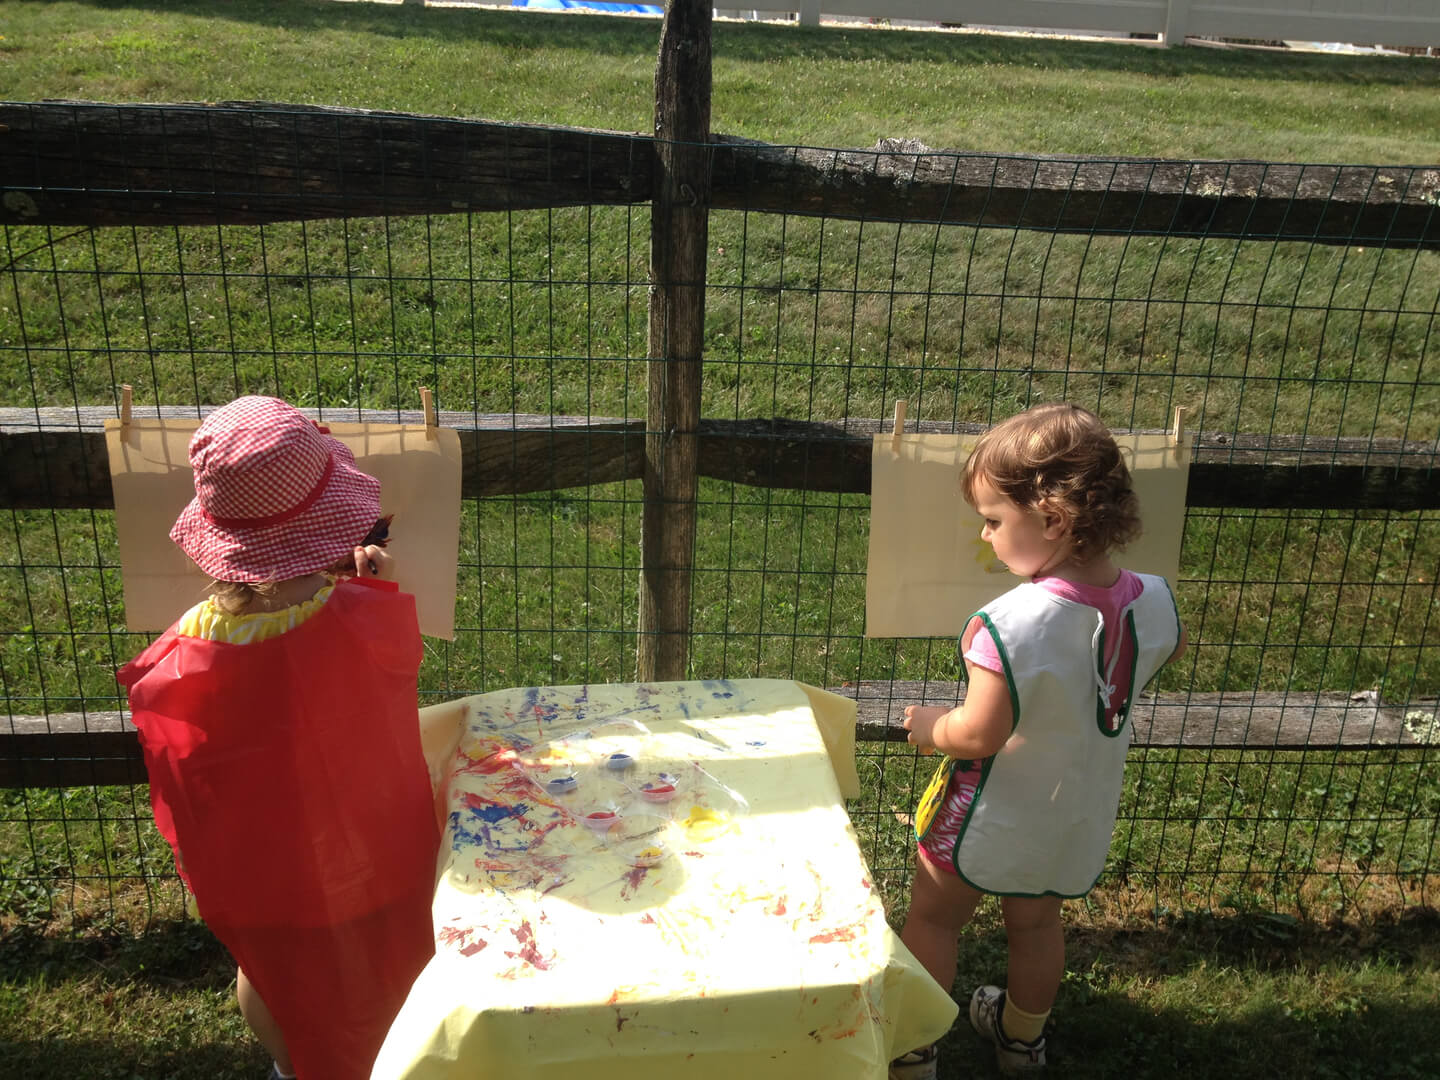 Two young girls painting outside